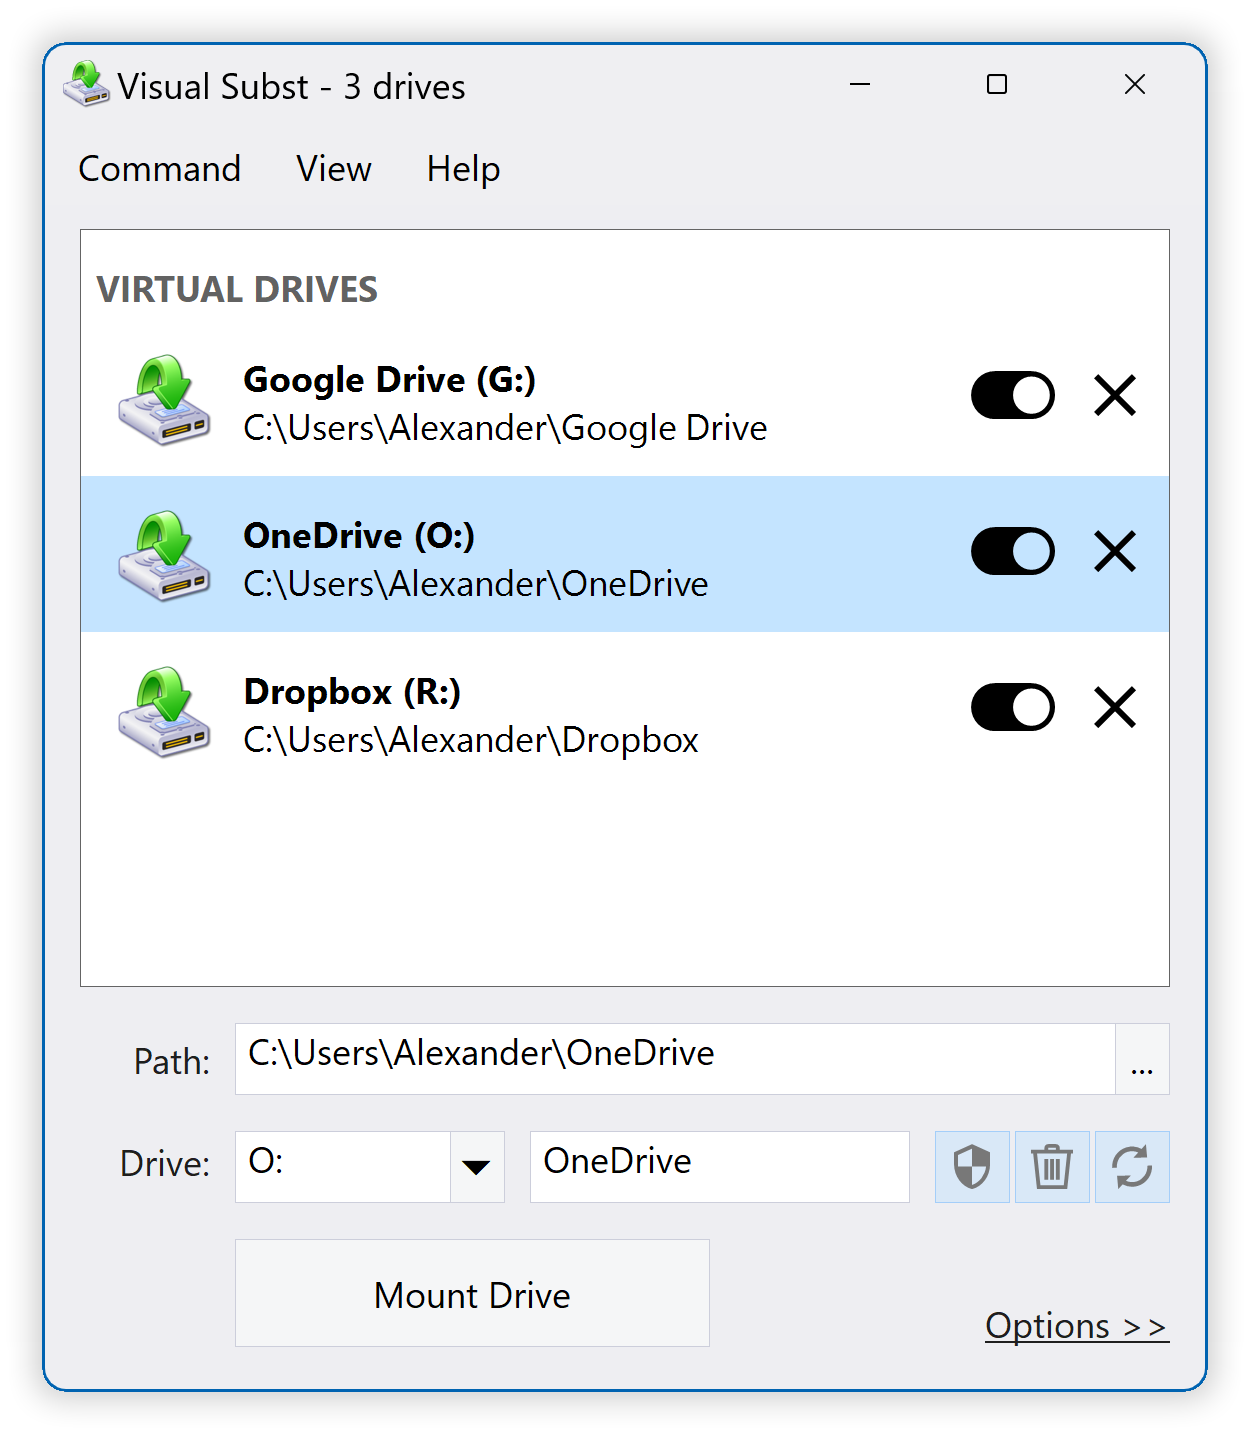 Visual Subst - Virtual Drives for Google Drive, Dropbox and OneDrive